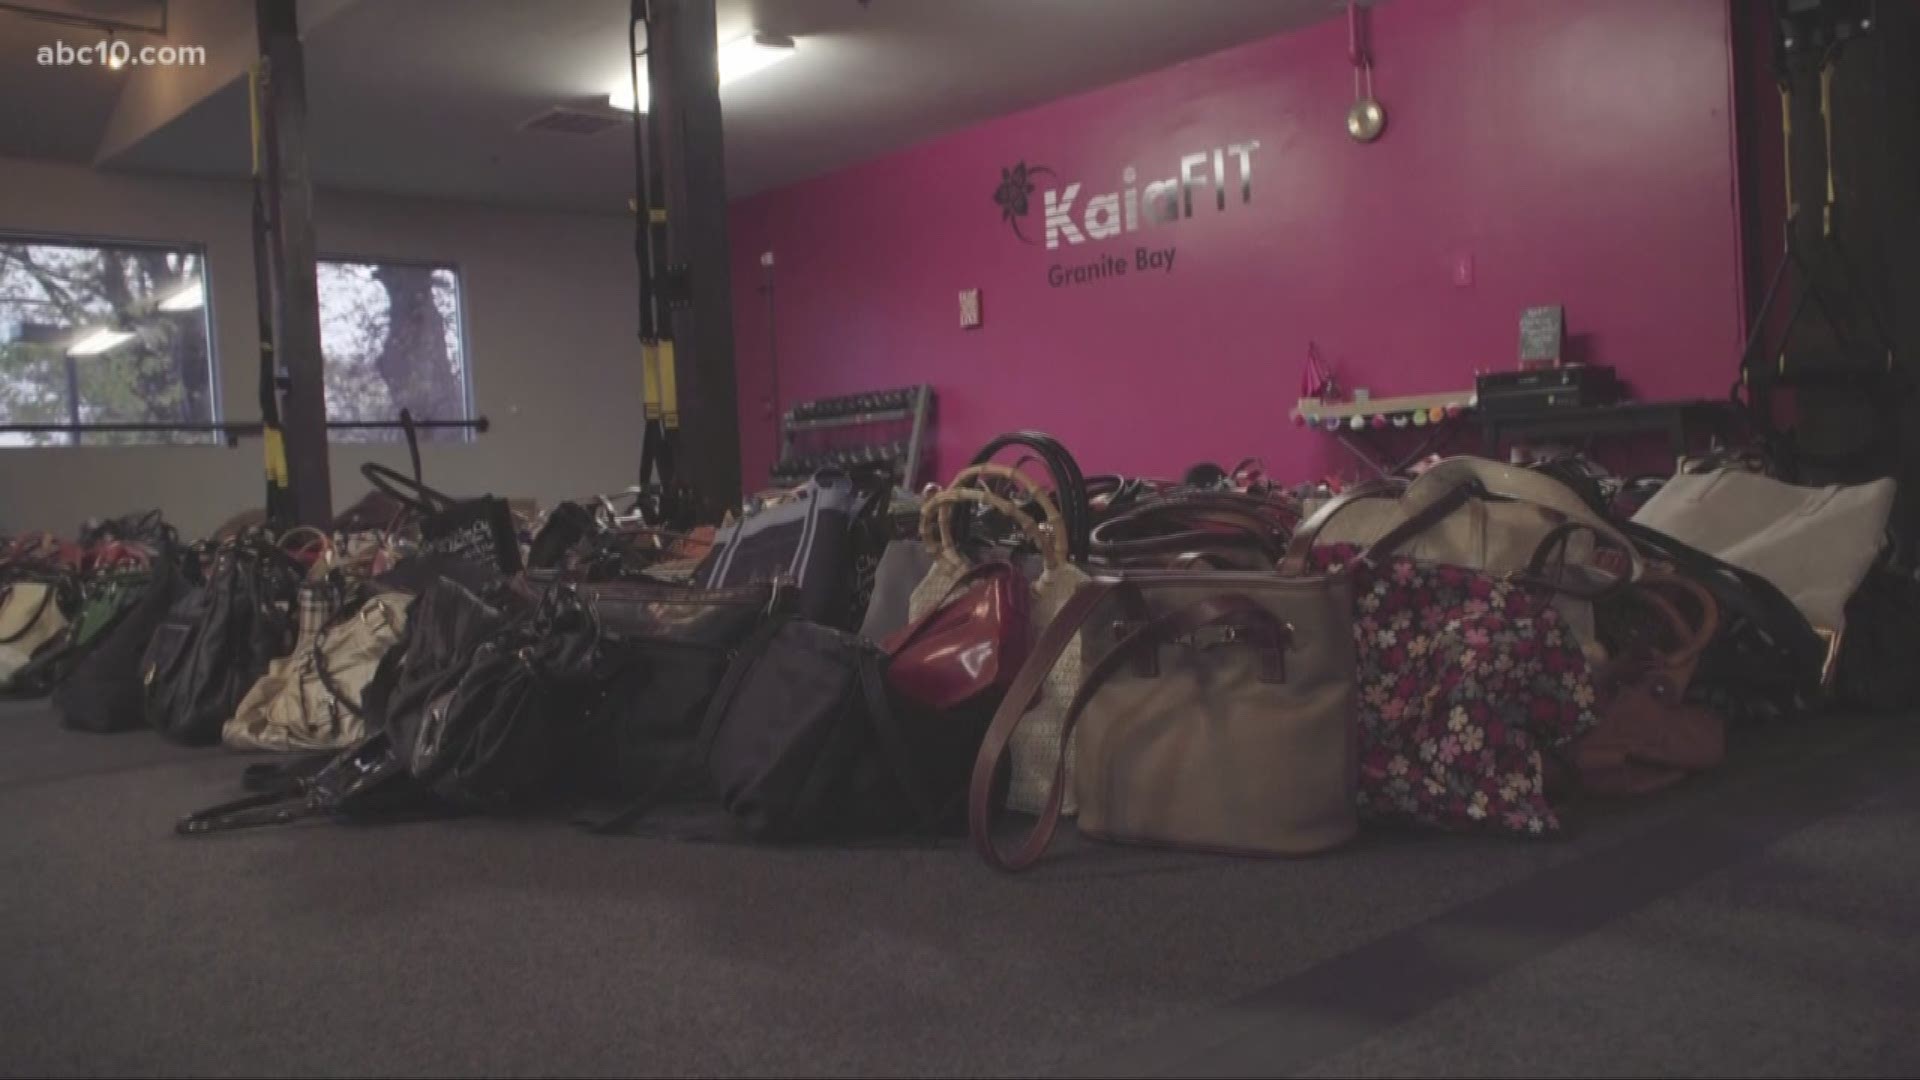 Julie Nakayama got the idea of collecting purses for others four years ago after seeing a post on Facebook encouraging women to take unused purses and donate them to homeless women.